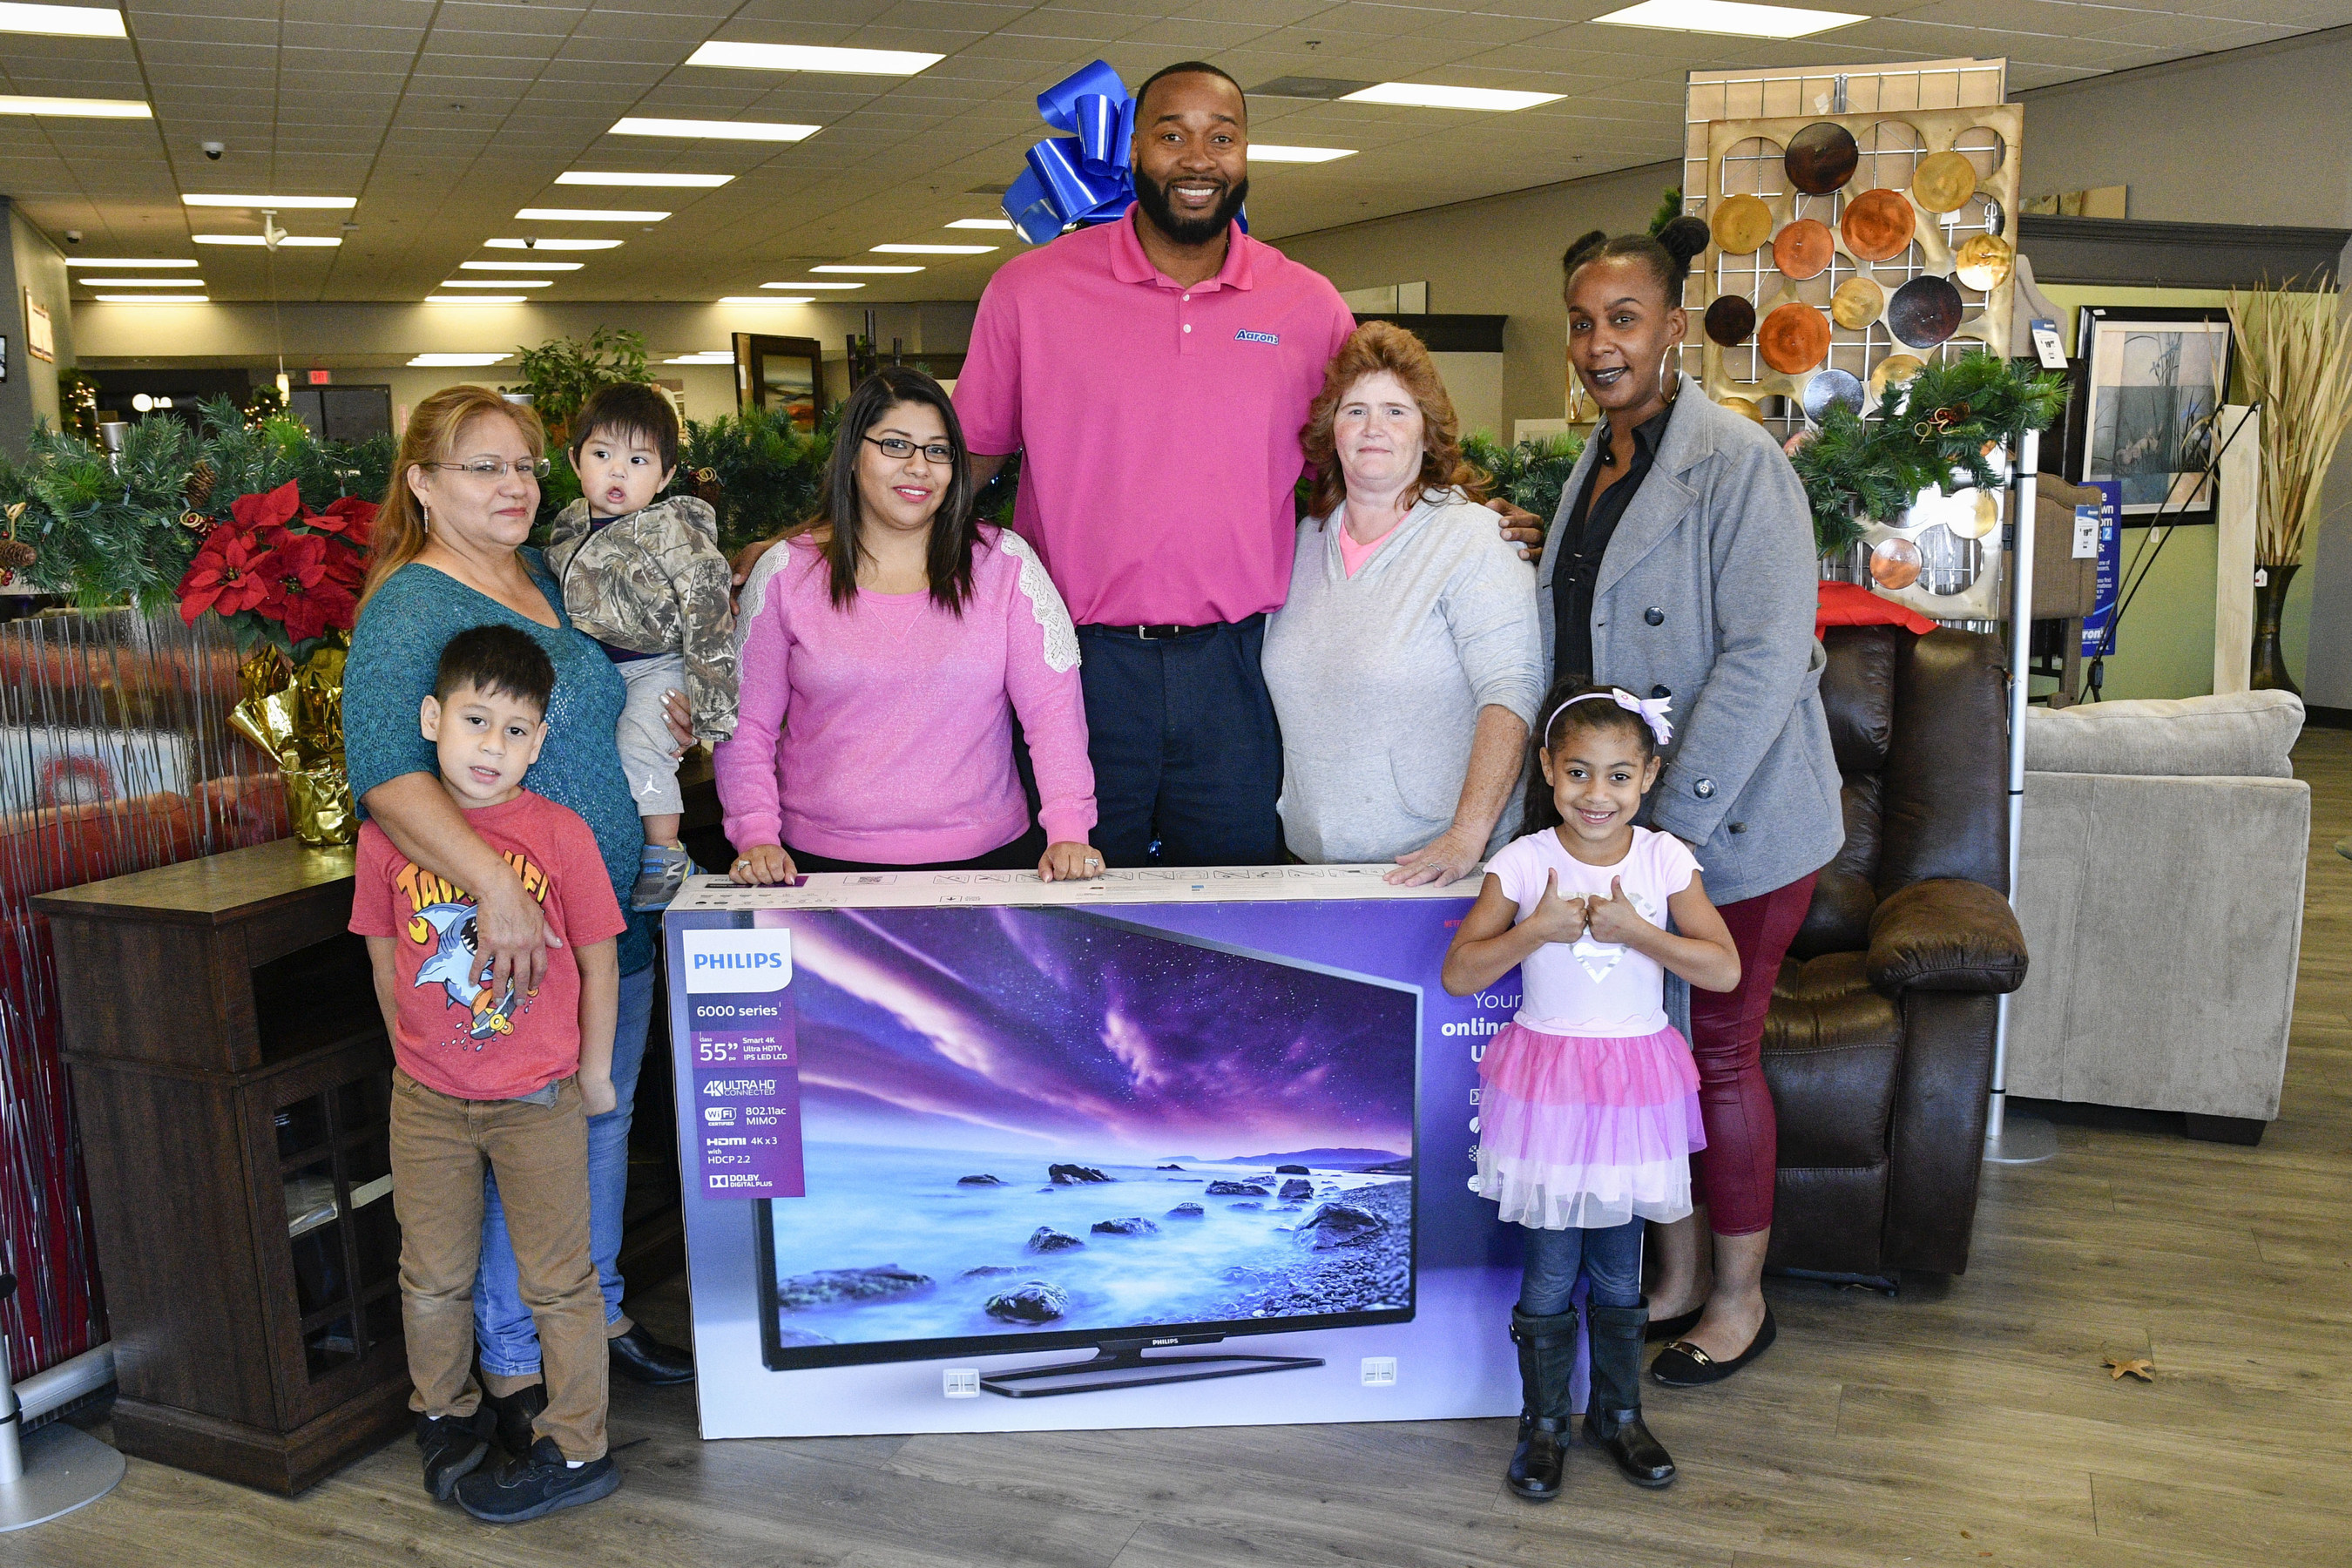 IMAGE DISTRIBUTED FOR AARON'S, INC - Aaron's regional manager Tyrone Washington, center, surprised loyal customers (L - R) Aurora Moreno, her daughter and grandchildren, Melissa Neese and Salina Arnold with free 55" Phillips Smart 4K UHD LED TVs at an Aaron's store on Monday, Nov. 21, 2016, in Atlanta, Ga. Aaron's kicked off a week-long Black Friday celebration today and also surprised loyal customers in Jacksonville, Fla., Memphis, Tenn. and Nashville, Tenn. with free 55" Phillips TVs. (John Amis/AP Images for Aaron's, Inc.)